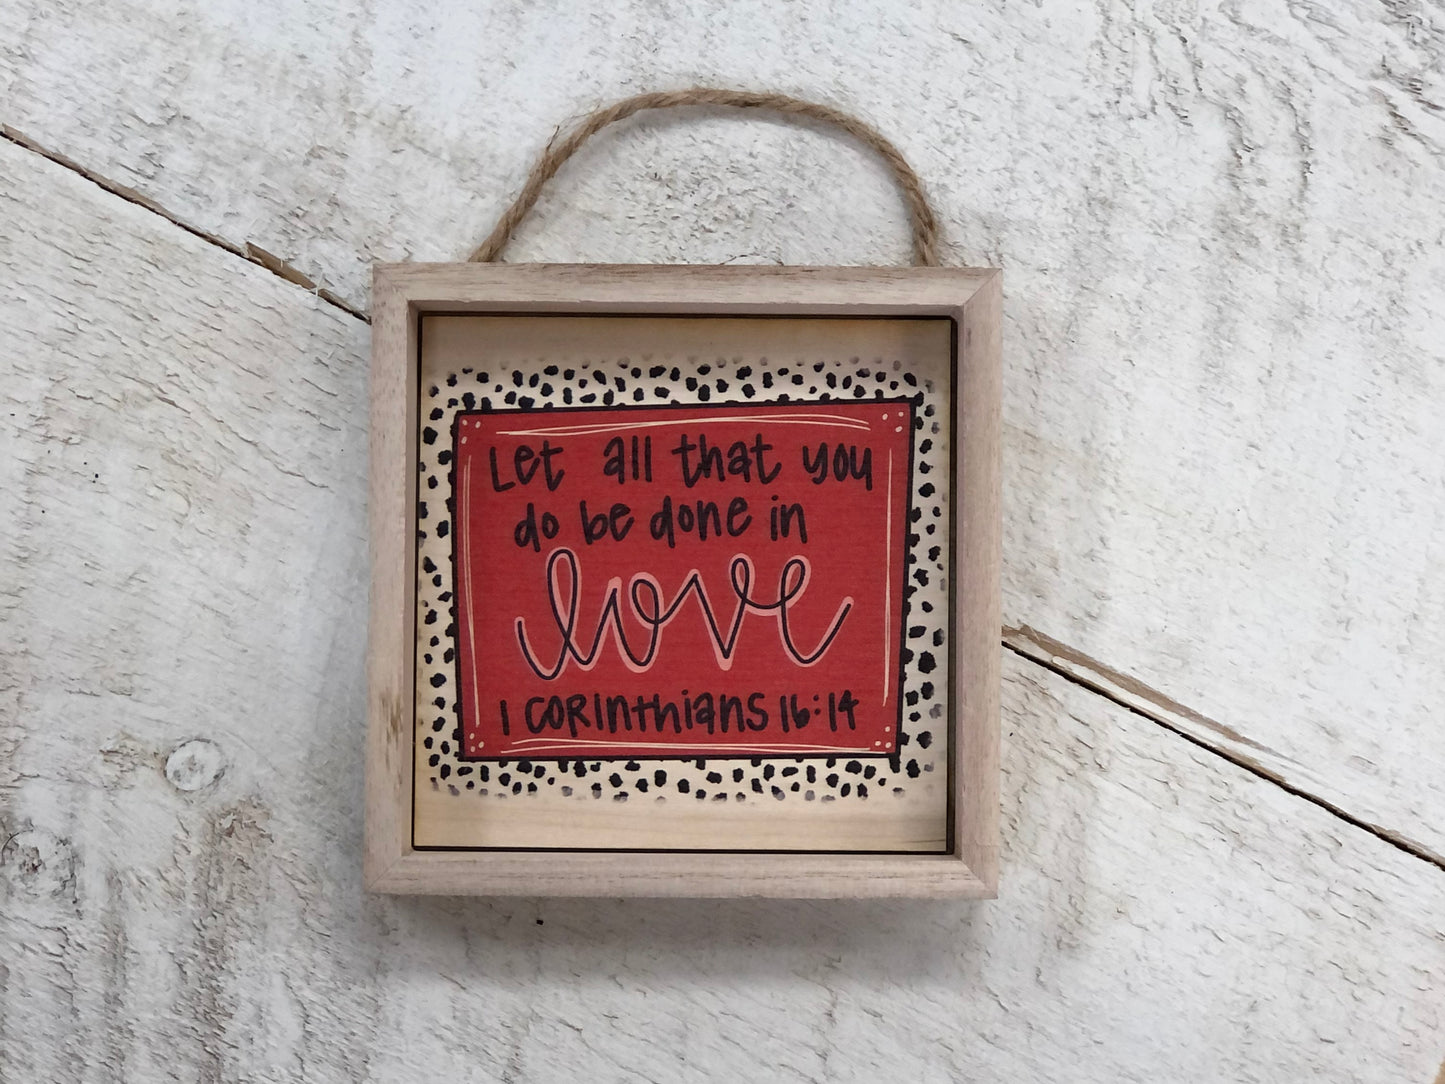 5" x 5" Let all that you do wooden sign